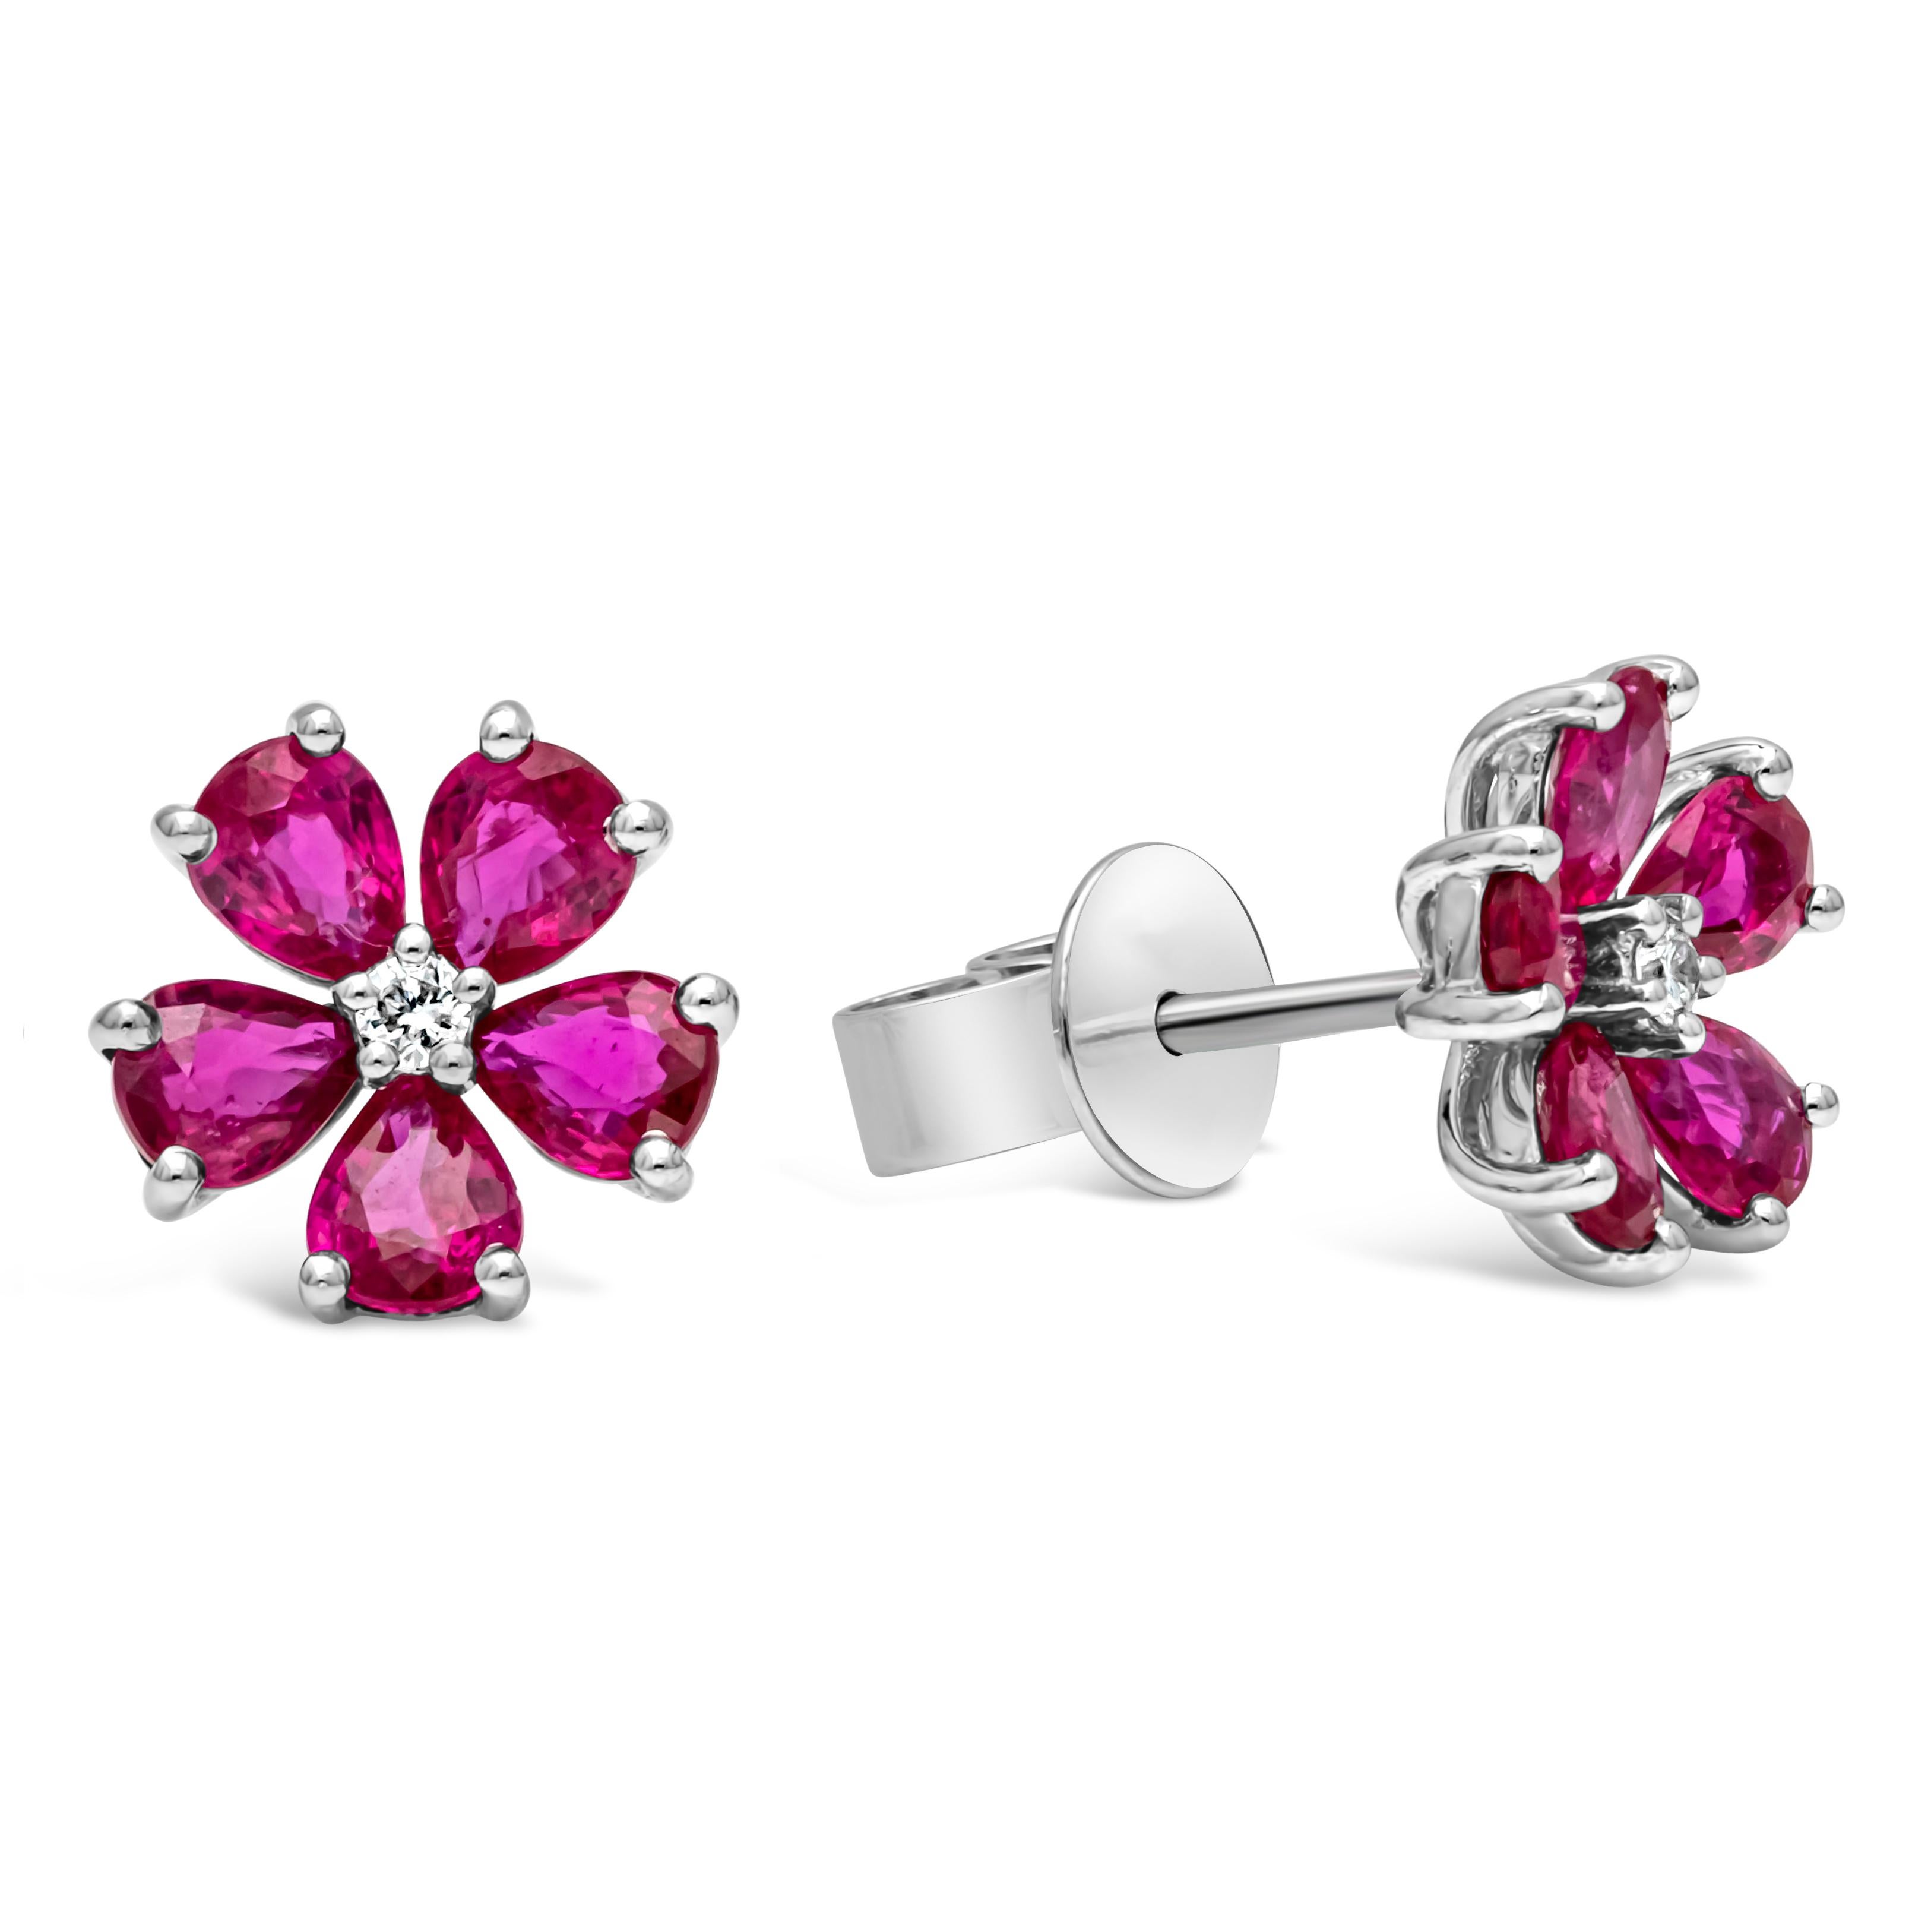 Contemporary Roman Malakov 1.86 Carats Total Pear Shape Ruby & Round Diamond Stud Earrings For Sale